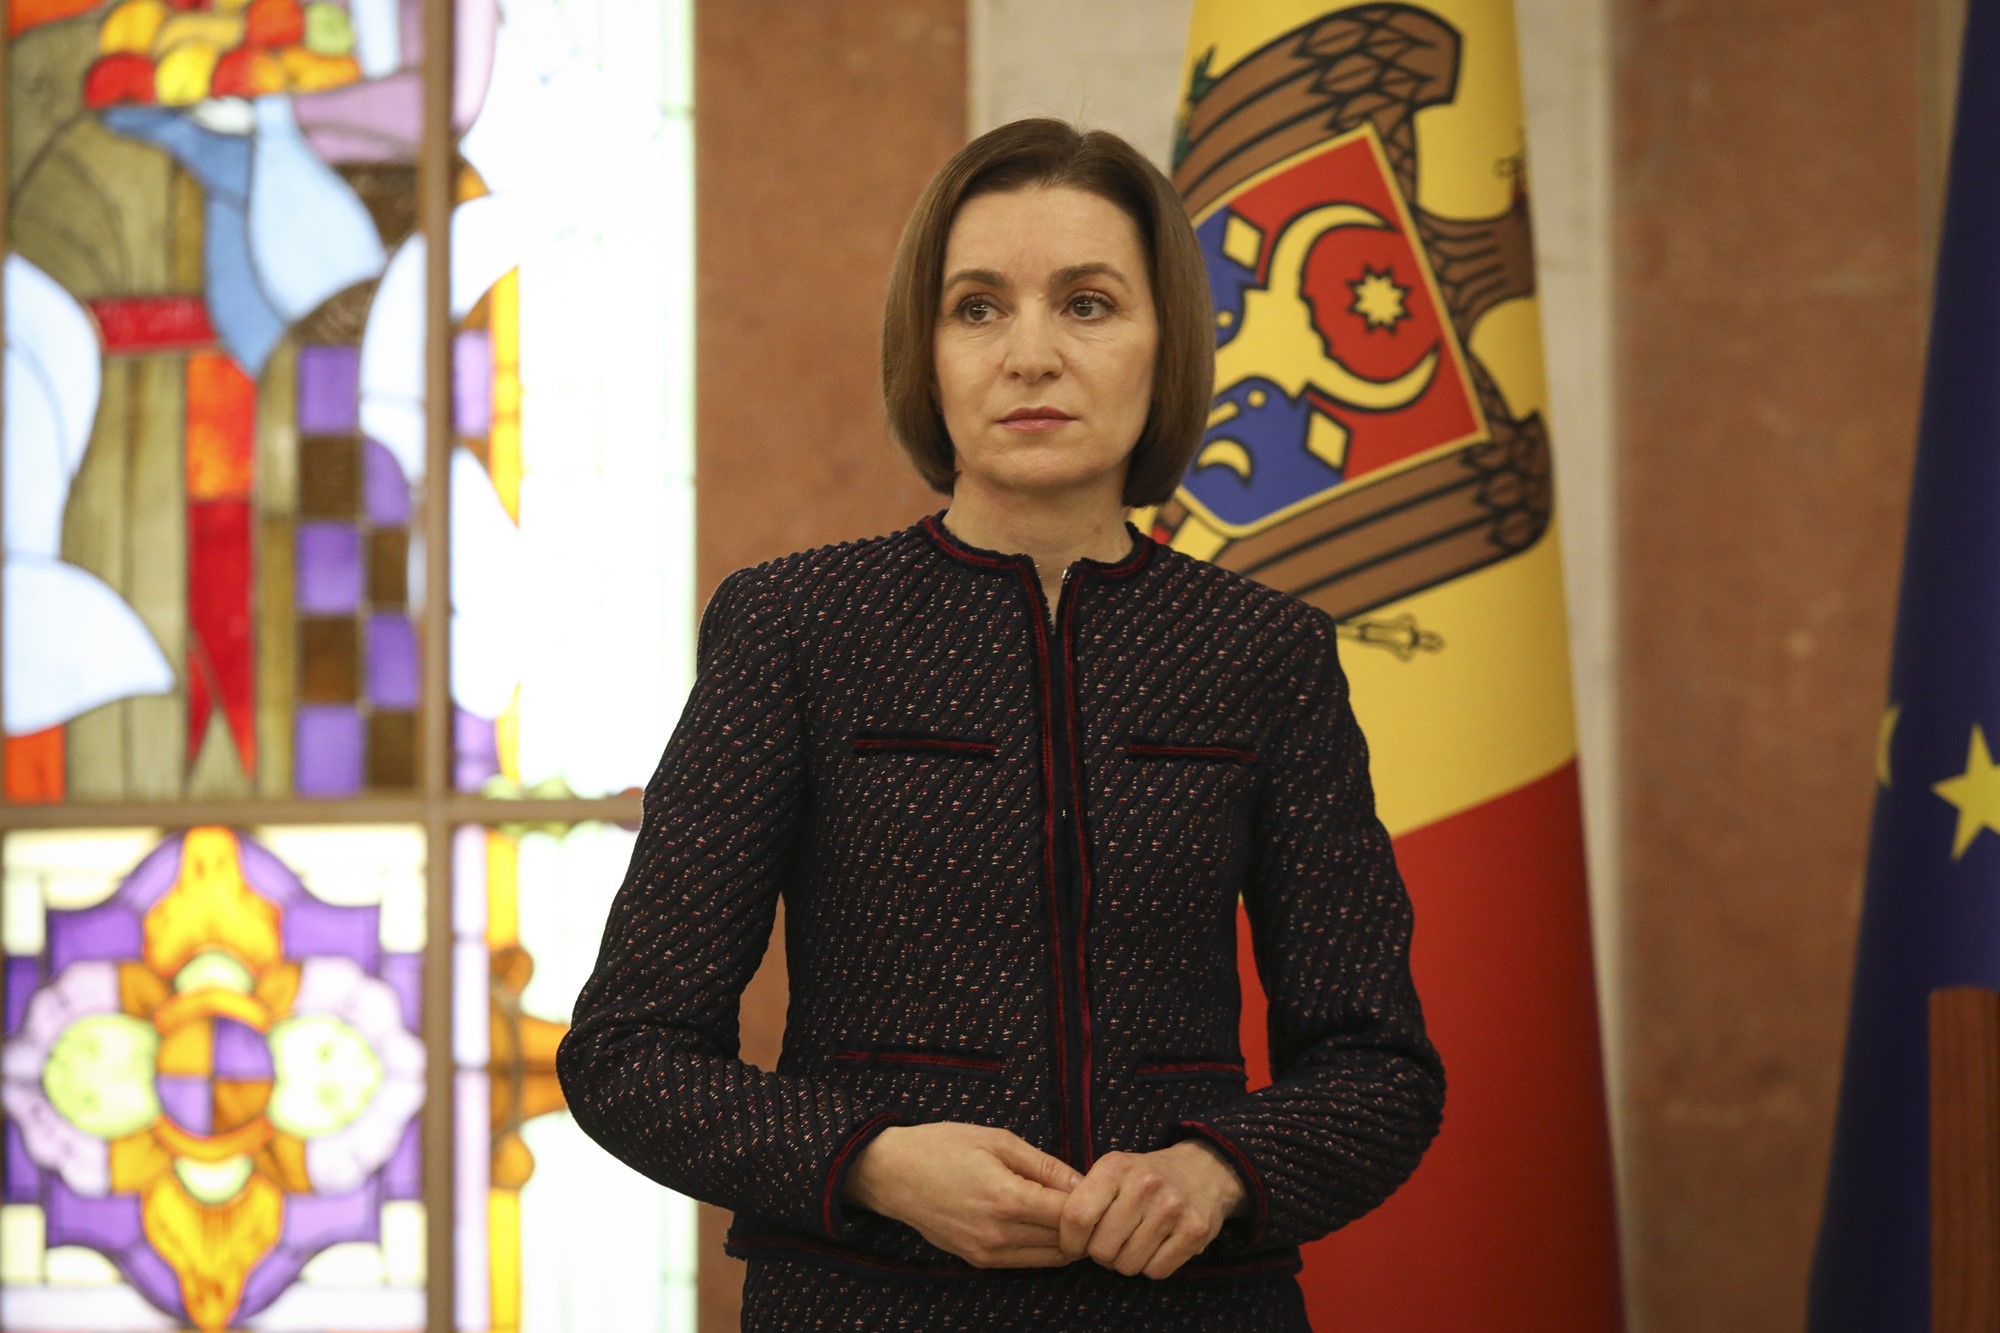 Maia stands in a chuch in front of a stained glass window and Moldovan flag.